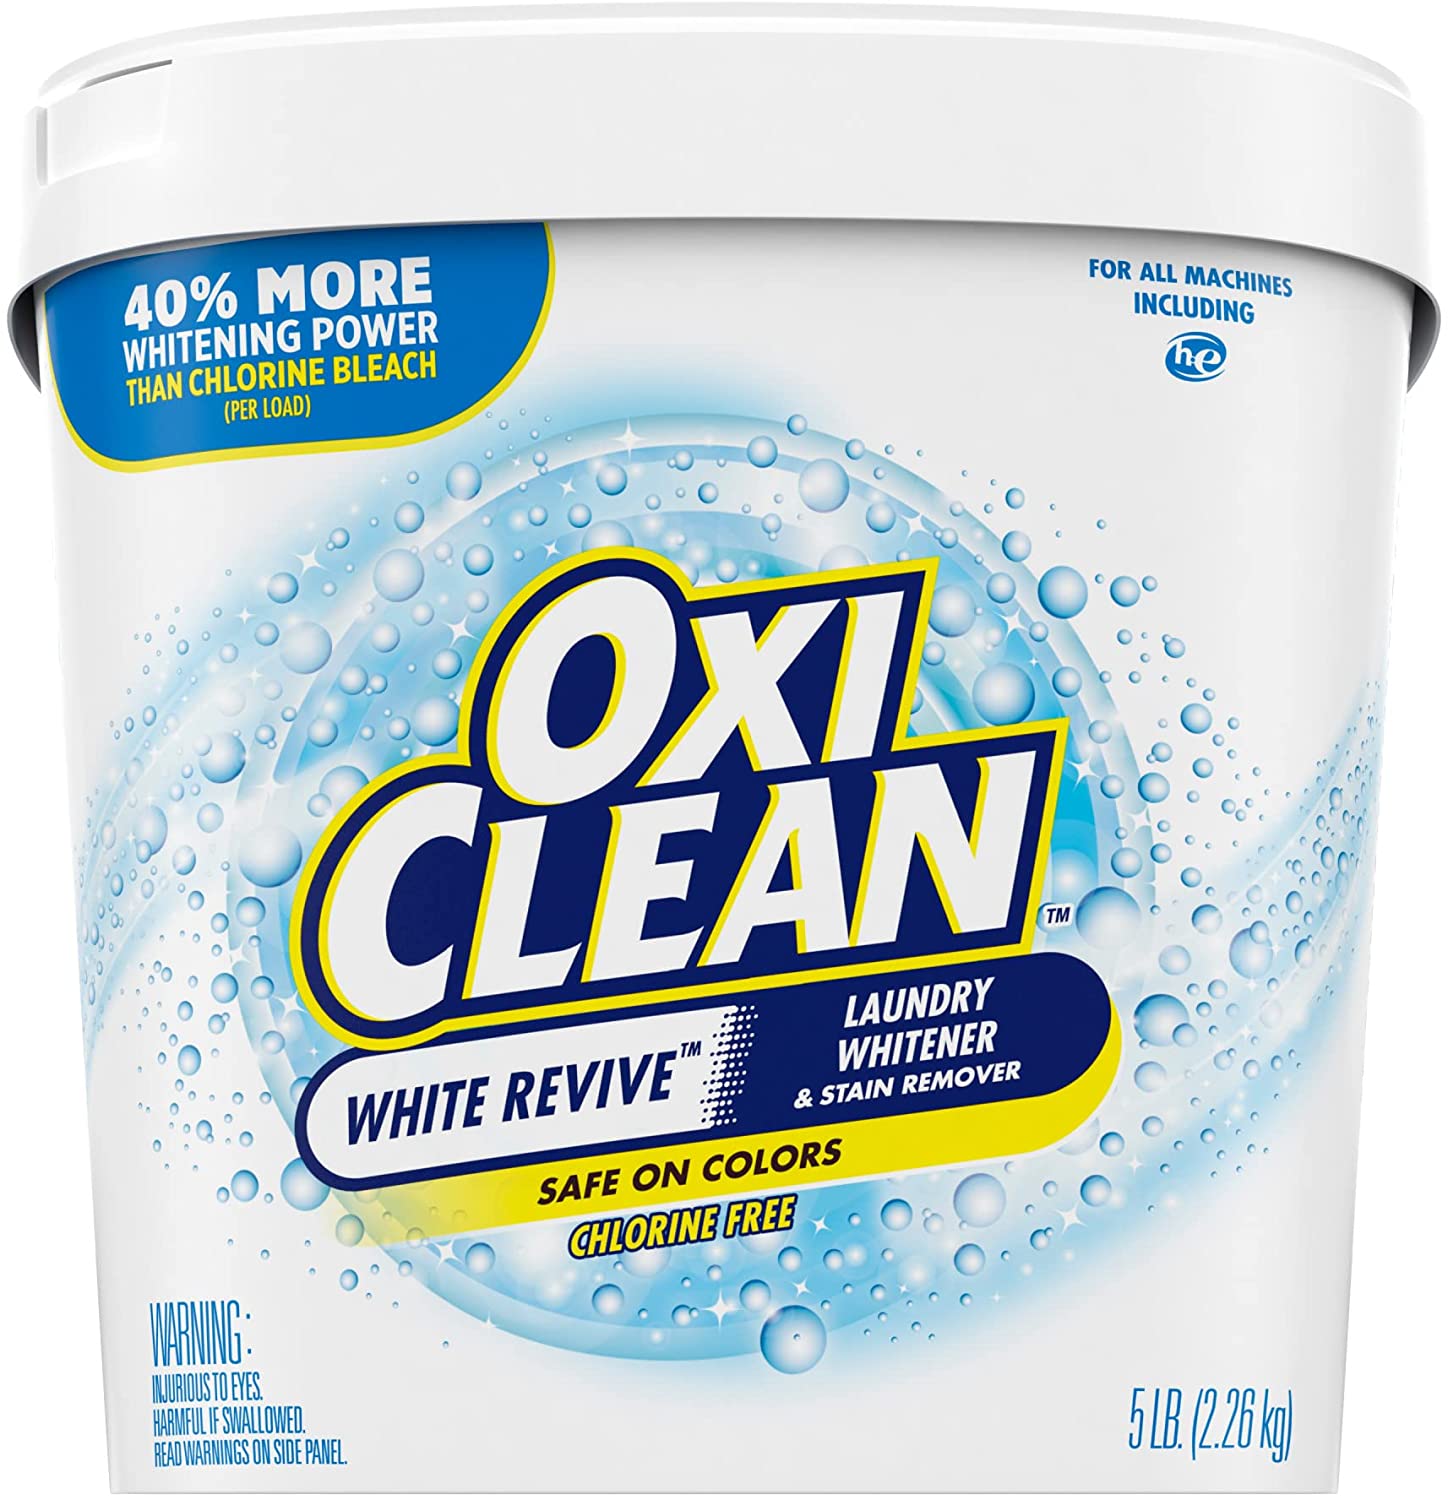 Oxiclean White Revive Laundry Whitener